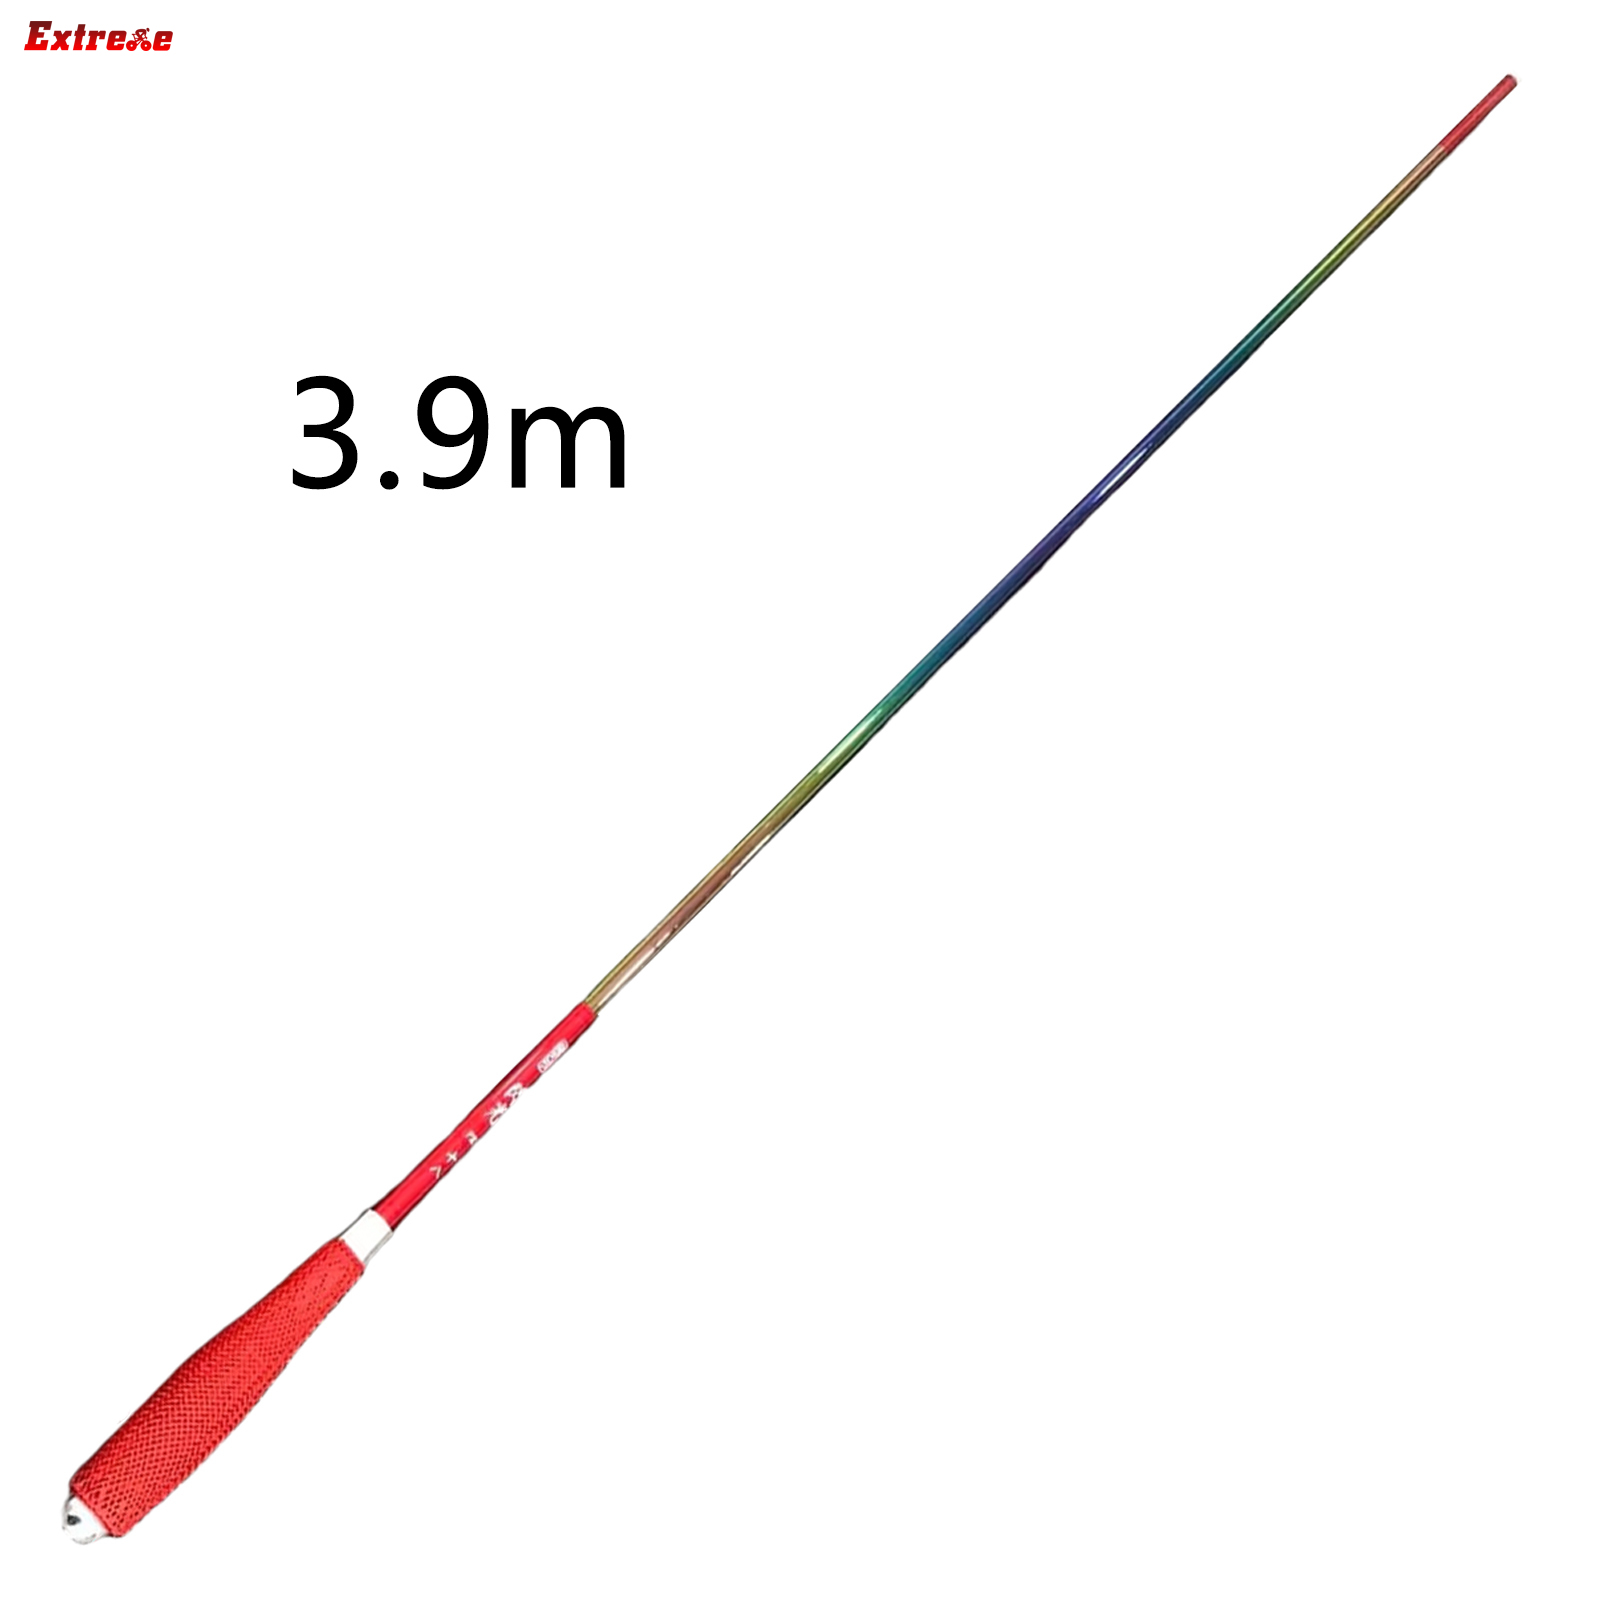 Extreme strong toughness fishing pole strong bearing capacity fishing rod